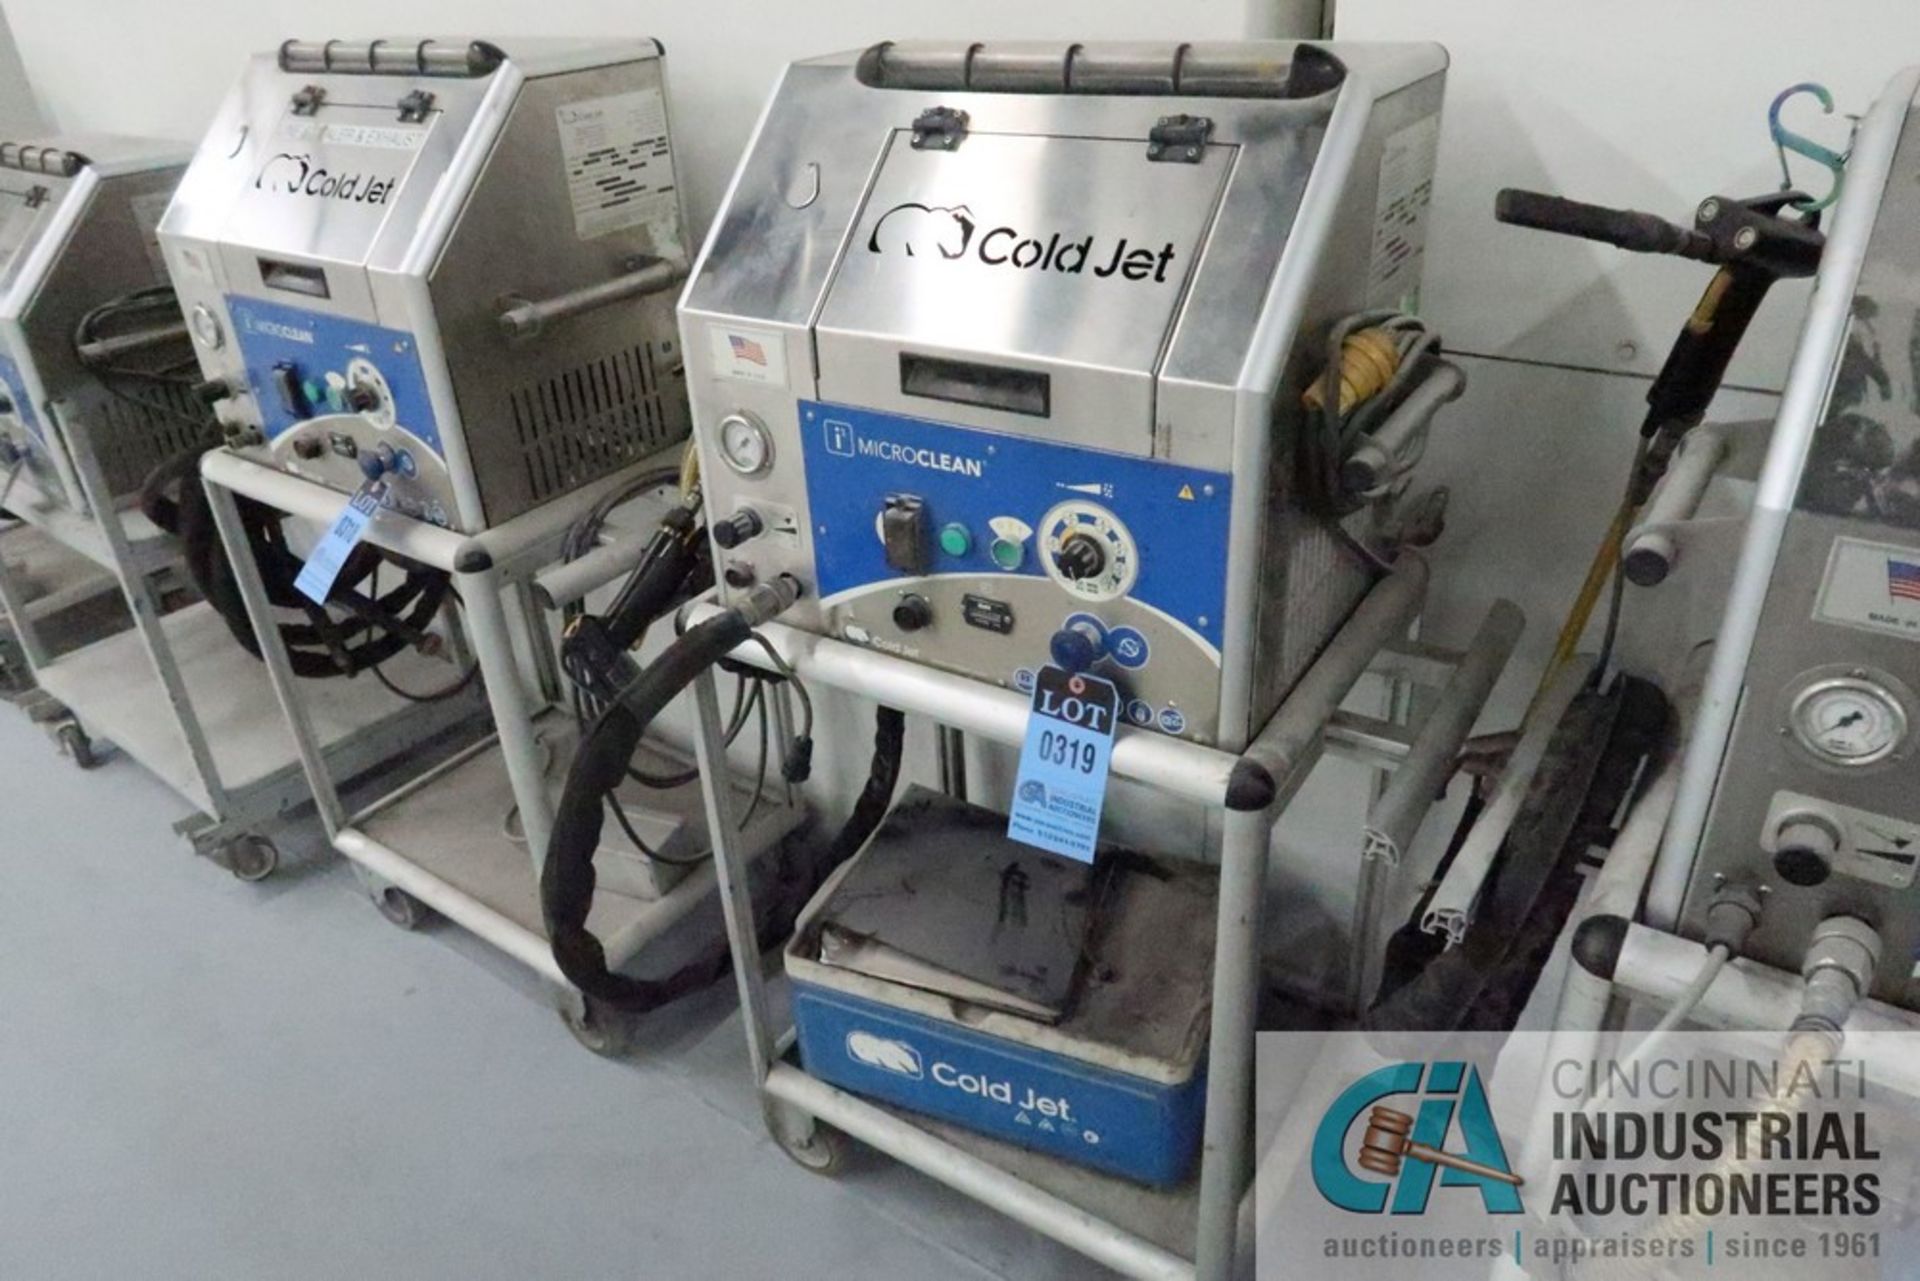 COLD JET MICRO-CLEAN ICE BLAST UNIT; S/N 108, ASSEMBLY NO. 2A0169-G1-D, 18,055 HOURS (2009)